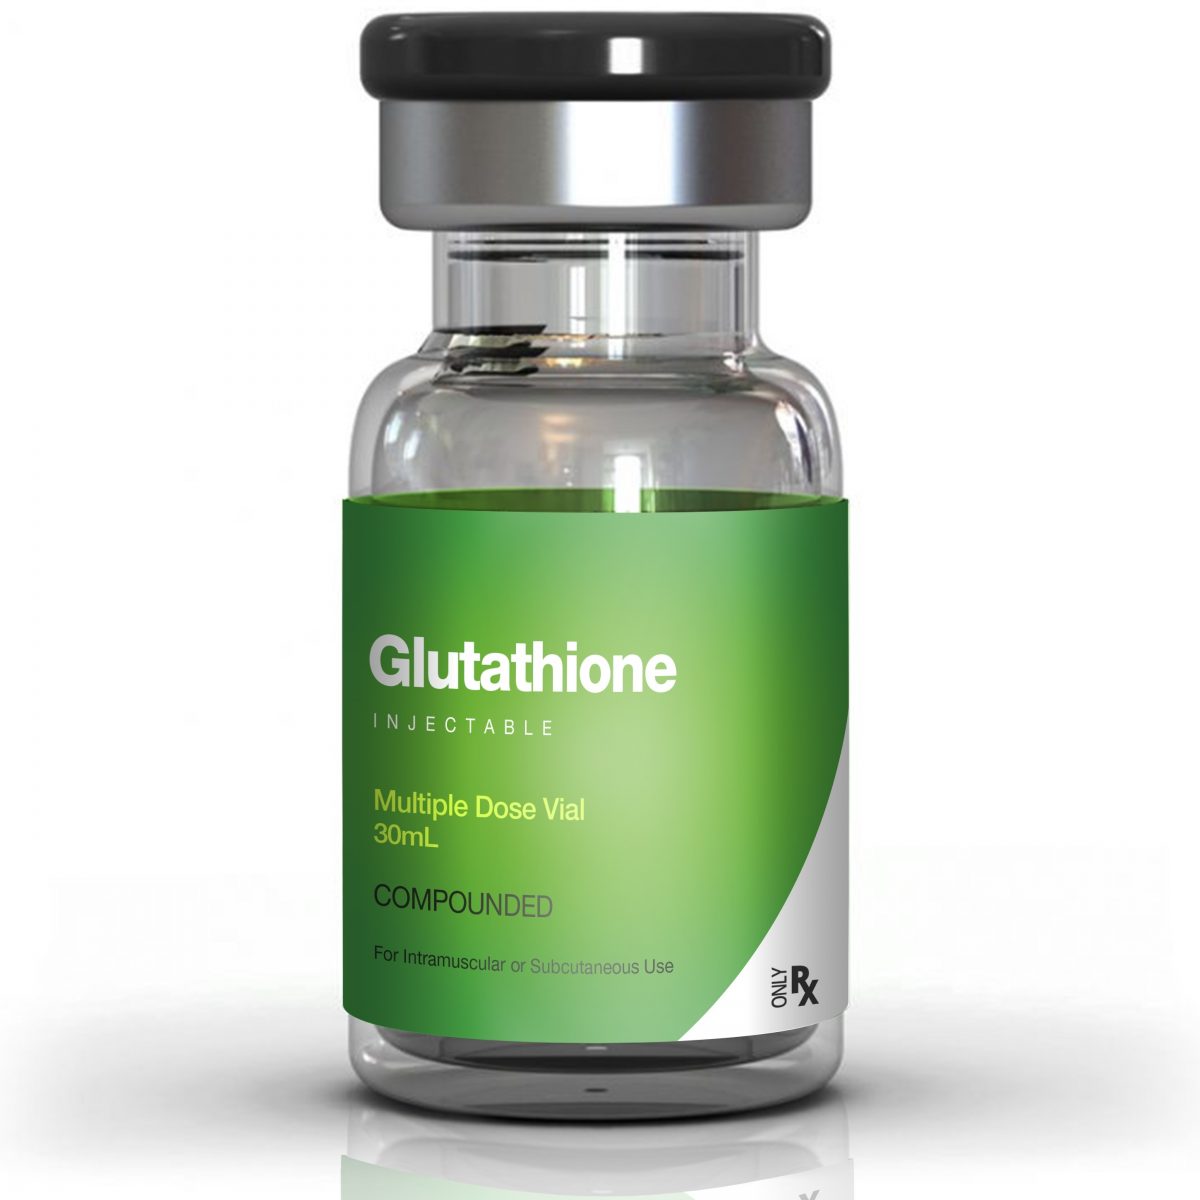 glutathione injections he villages